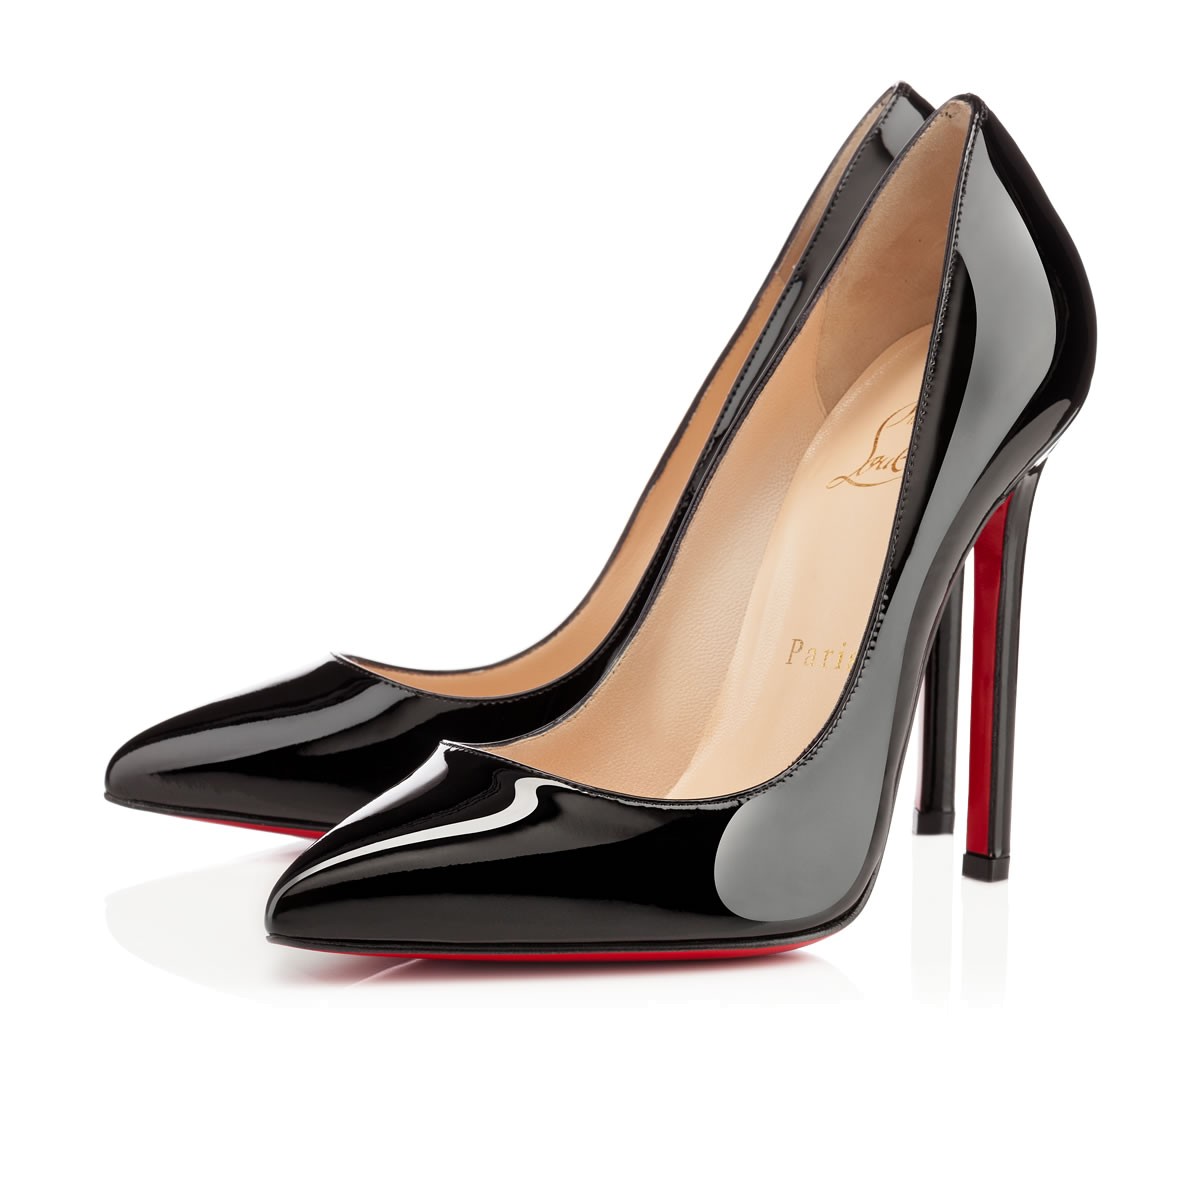 Christian Louboutin’s iconic Pigalle high heels turn 10 years old ...